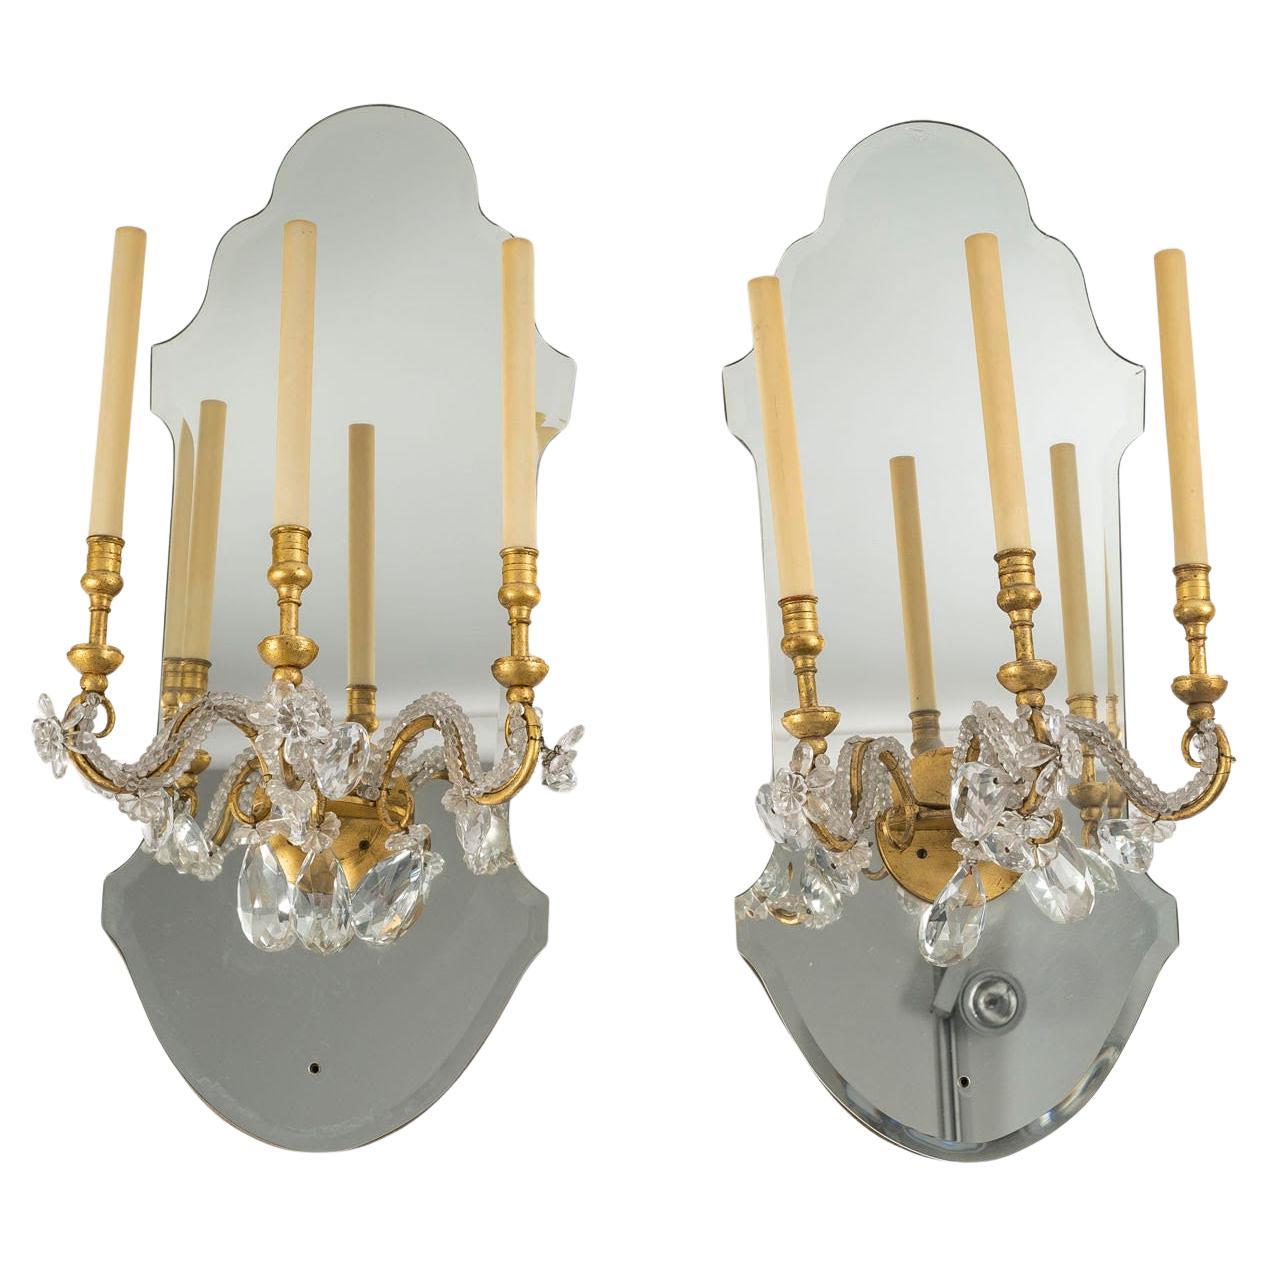 Pair of Gilded Iron and Mirror Sconces with Glass Drops, 1950-1960. For Sale